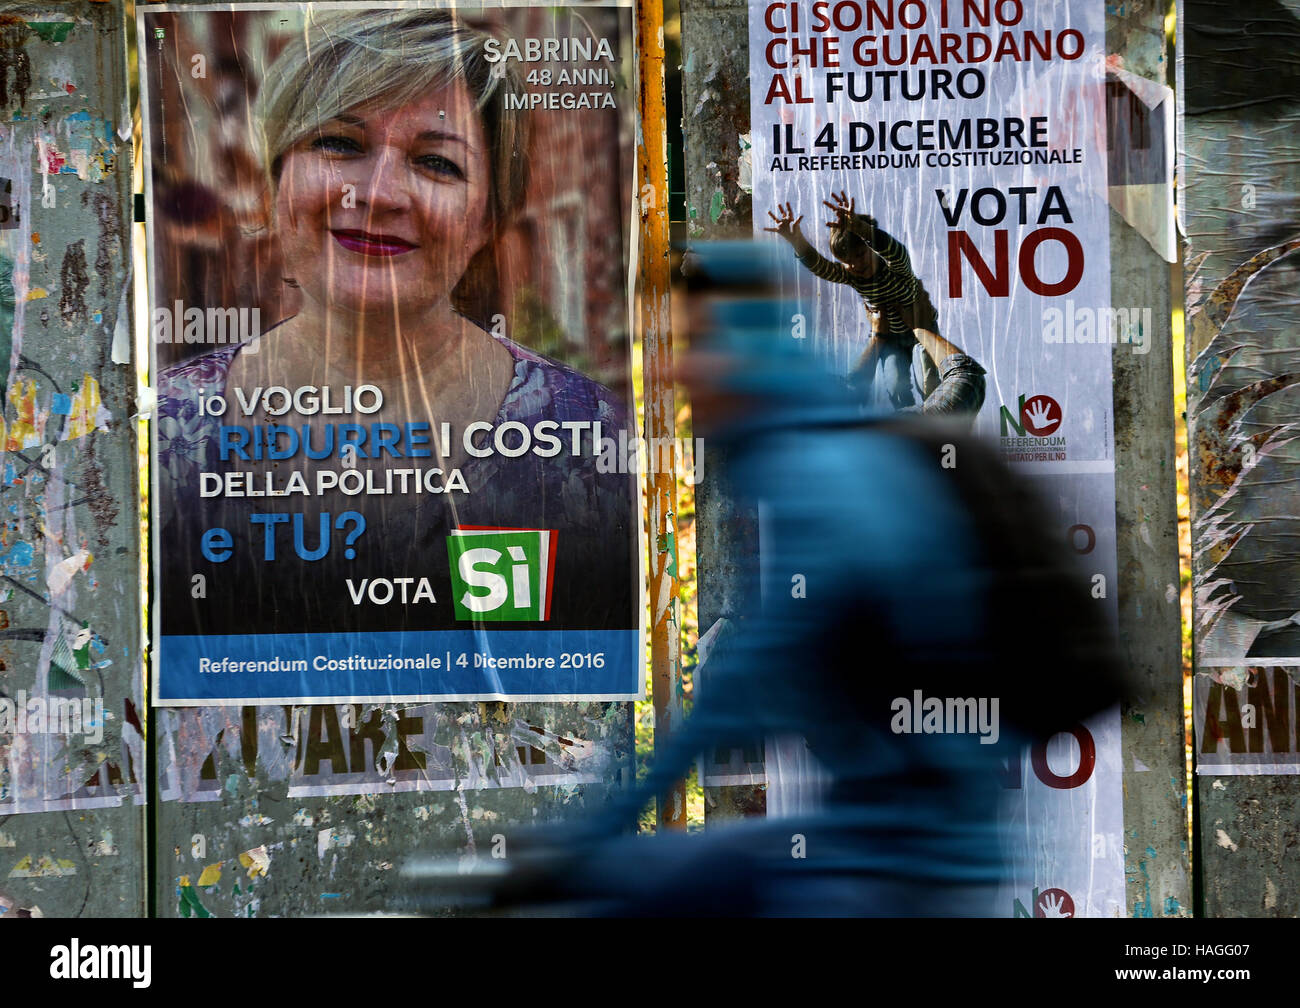 Rome, Italy. 1st Dec, 2016. A man rides past two posters in support of the "Yes" vote (L) and "No" vote respectively in an upcoming constitutional referendum in Rome, Italy, Dec. 1, 2016. The poster on the left reads "I want the politics cost to be reduced, and you? Vote Yes", while the poster on the right reads "There are some No concerning the future". On Dec. 4, voters will be called to have their say on a constitutional reform package, which the parliament had already approved with six consecutive readings in over two and a half years long debate. Credit:  Jin Yu/Xinhua/Alamy Live News Stock Photo